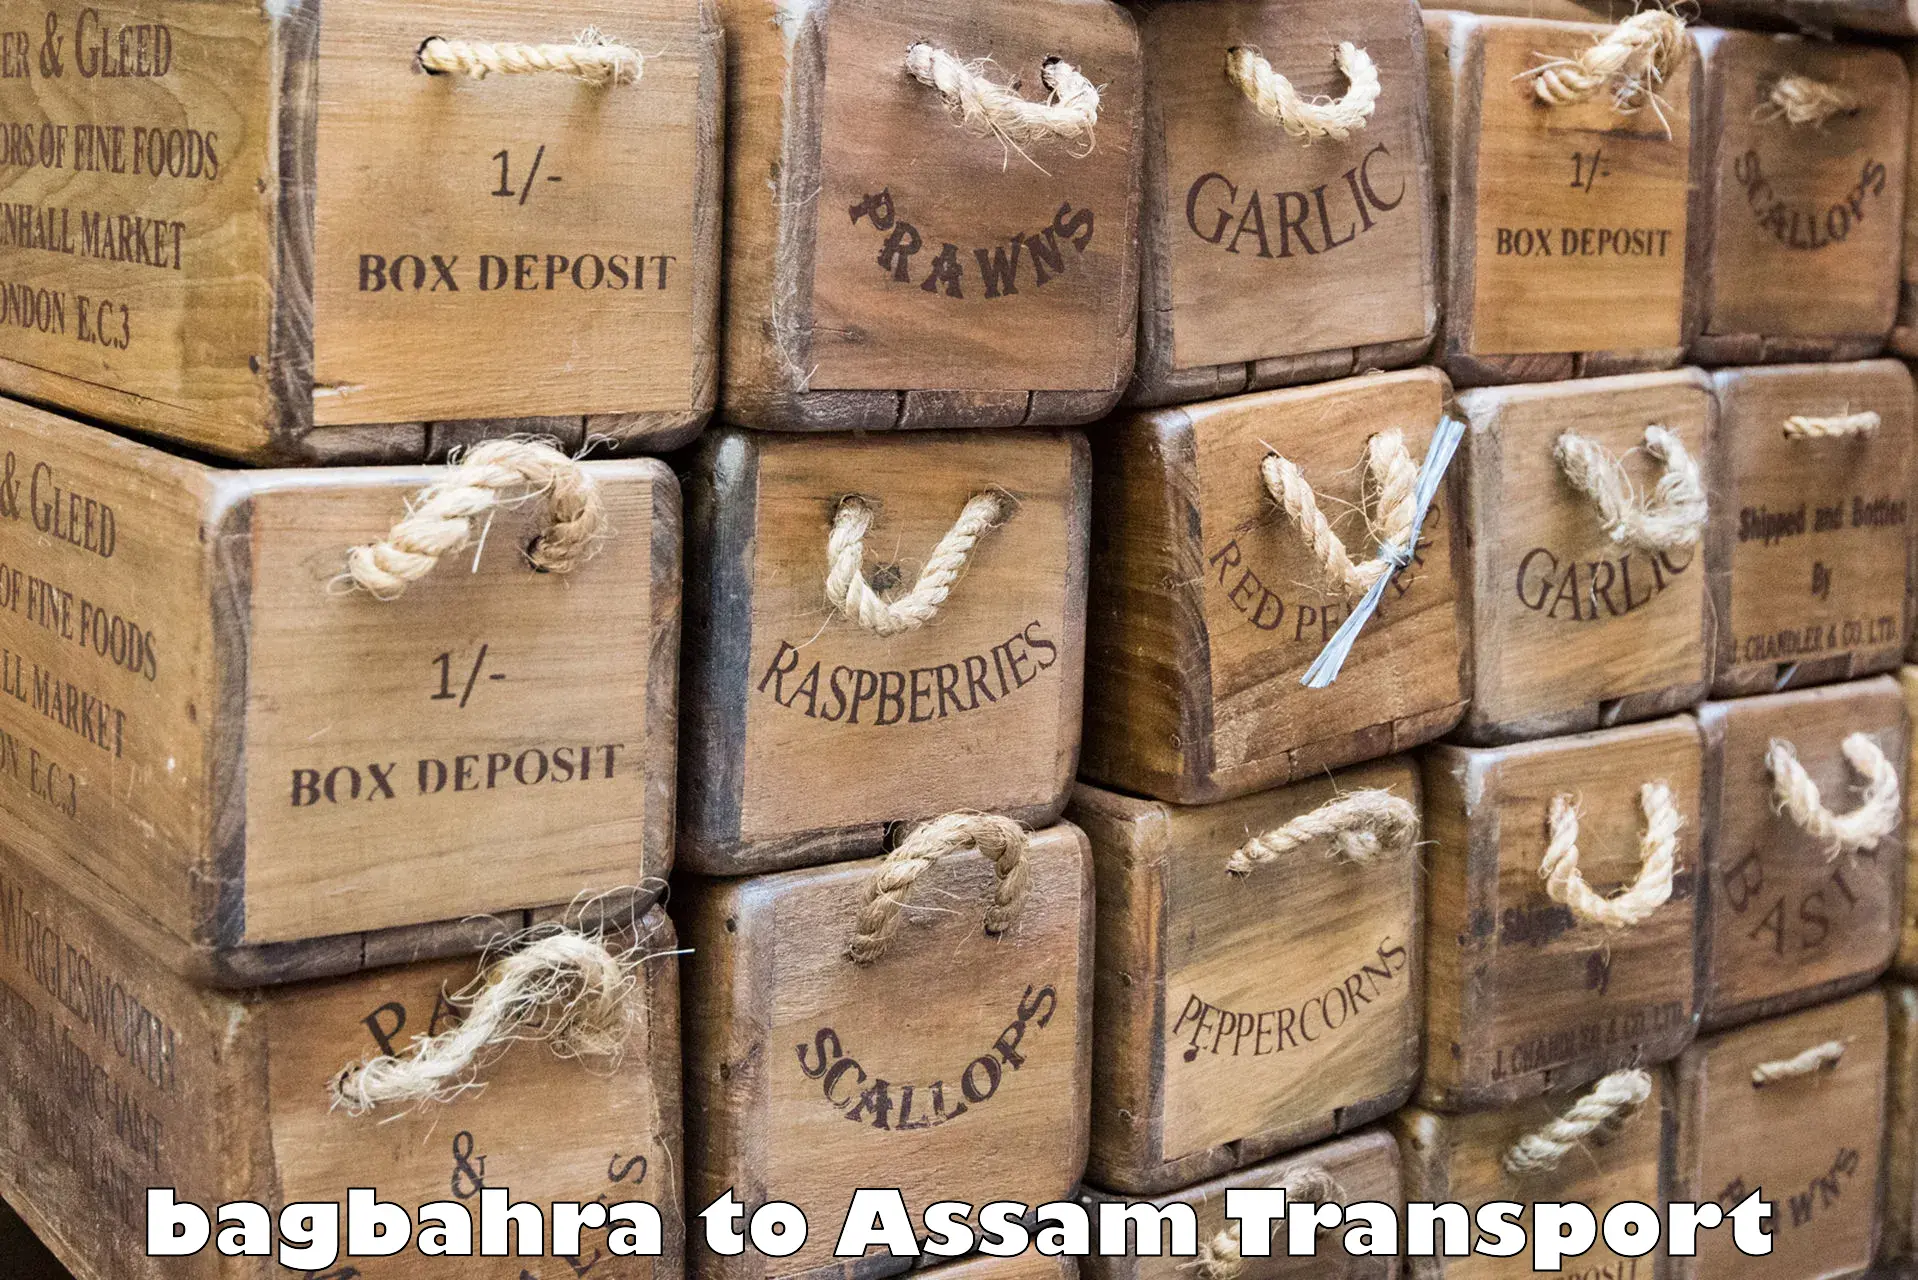 Lorry transport service bagbahra to Rowta